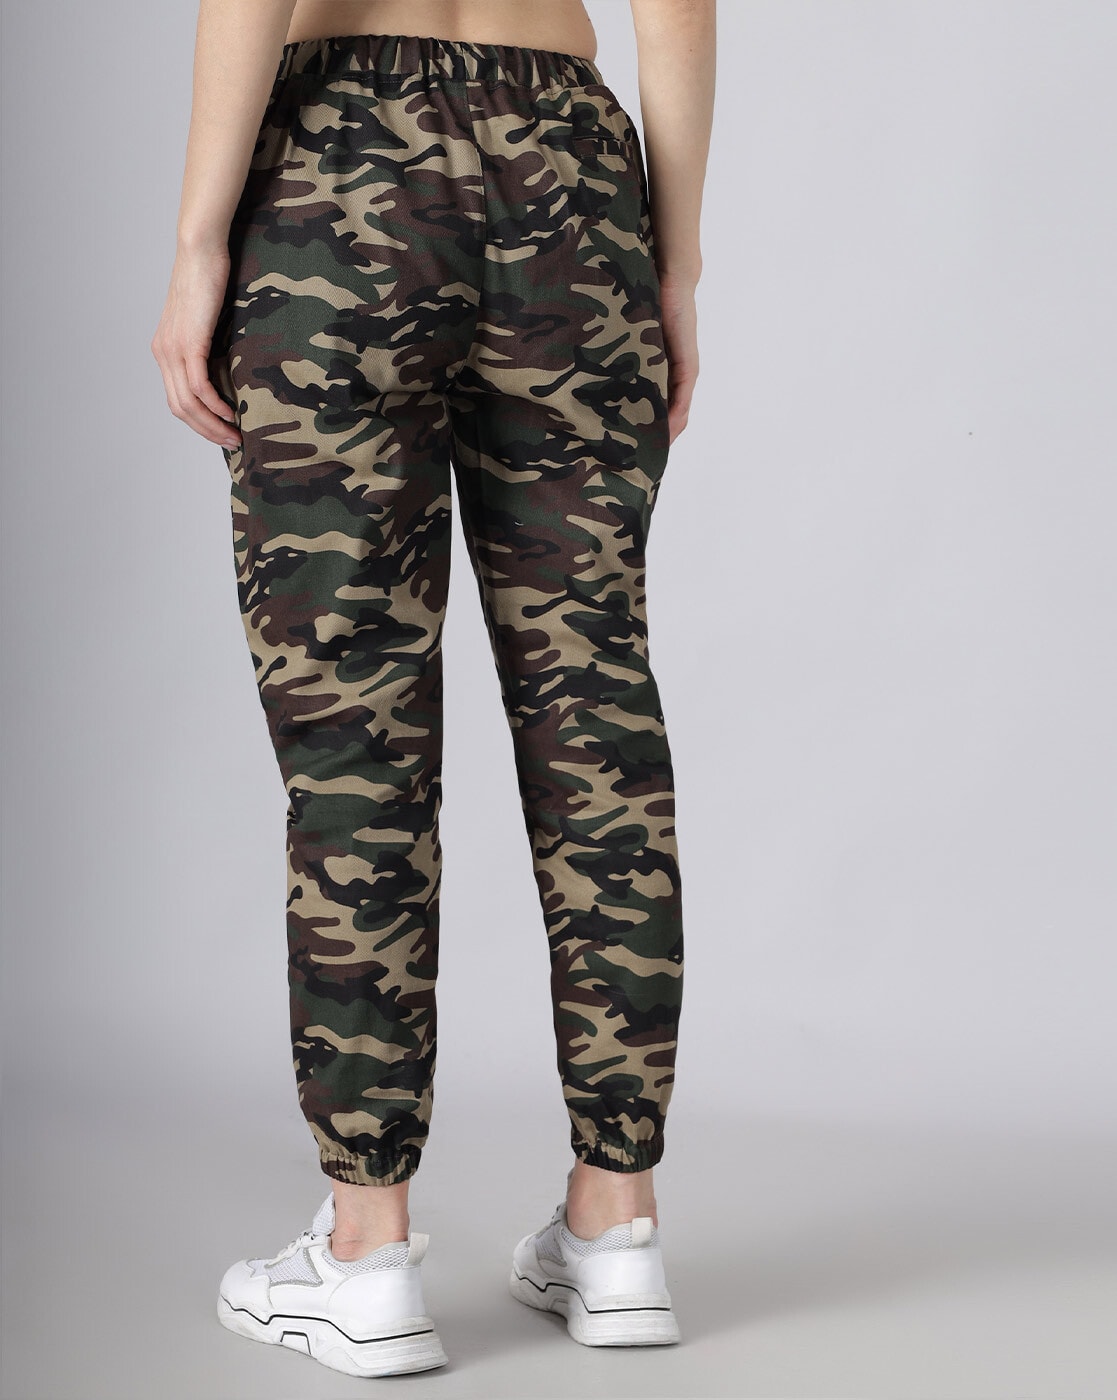 Women's Black and White Camo Paratrooper Pants